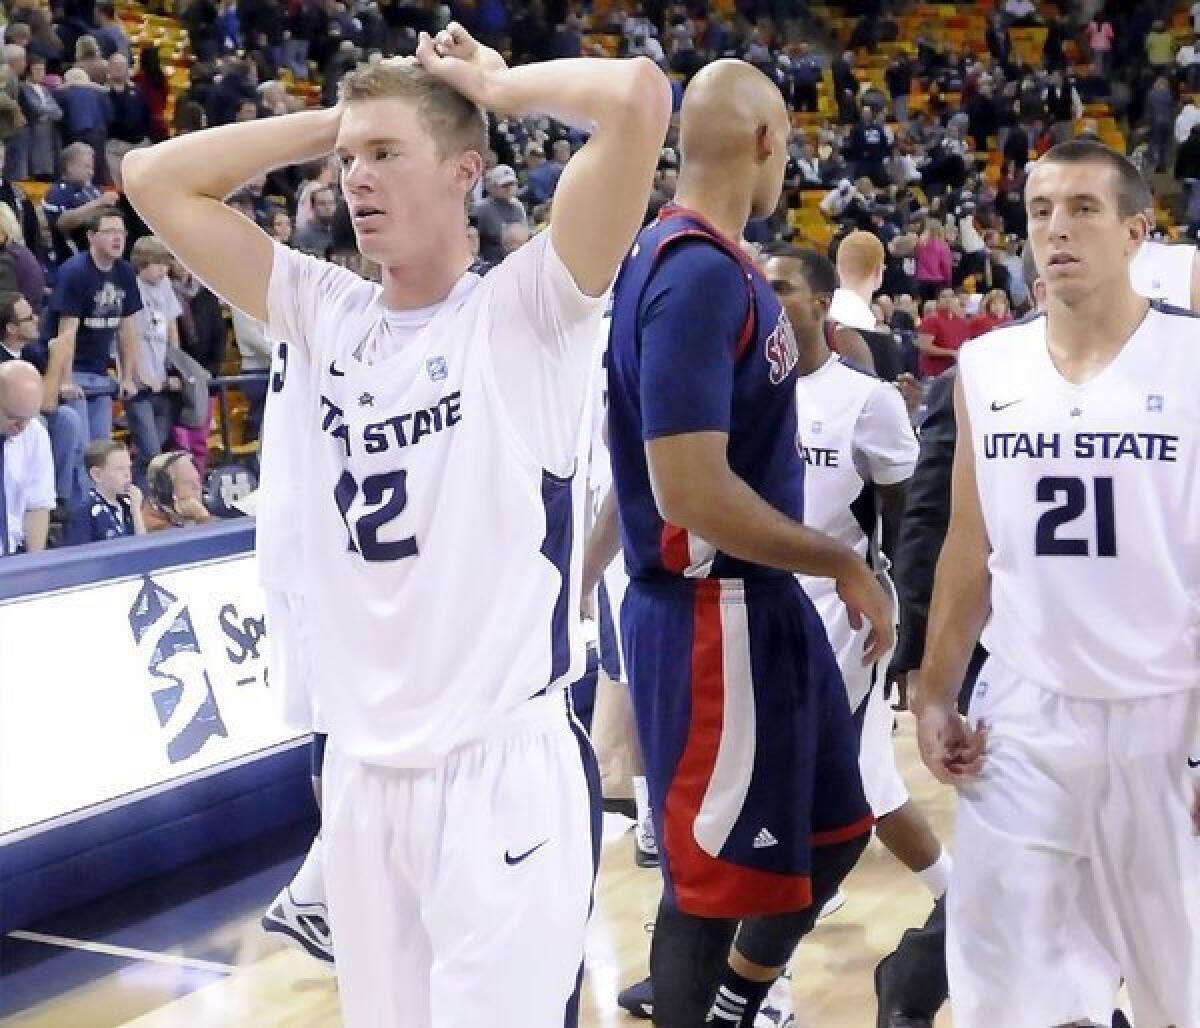 Utah State forward Danny Berger, left, walks off the court after a game against Saint Mary's.